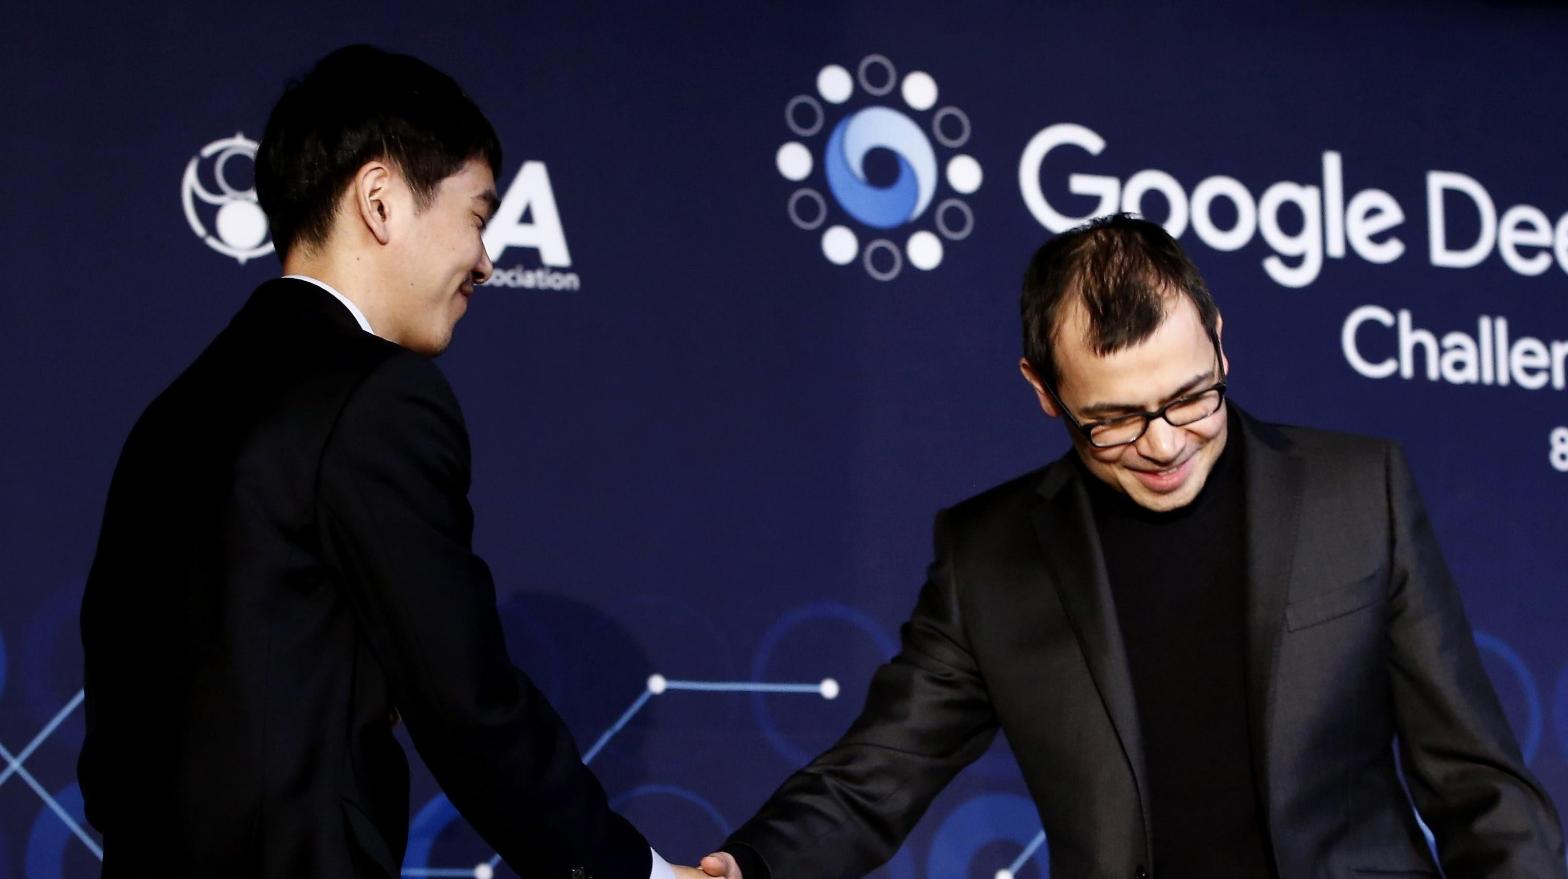 Demis Hassabis (right), the co-founder of DeepMind, is now going to be heading up Google's major AI division. The London-based division's biggest claim to fame was its AlphaGo AI-based Go playing program which beat a world Go champion back in 2016. (Photo: Jeon Heon-Kyun-Pool, Getty Images)